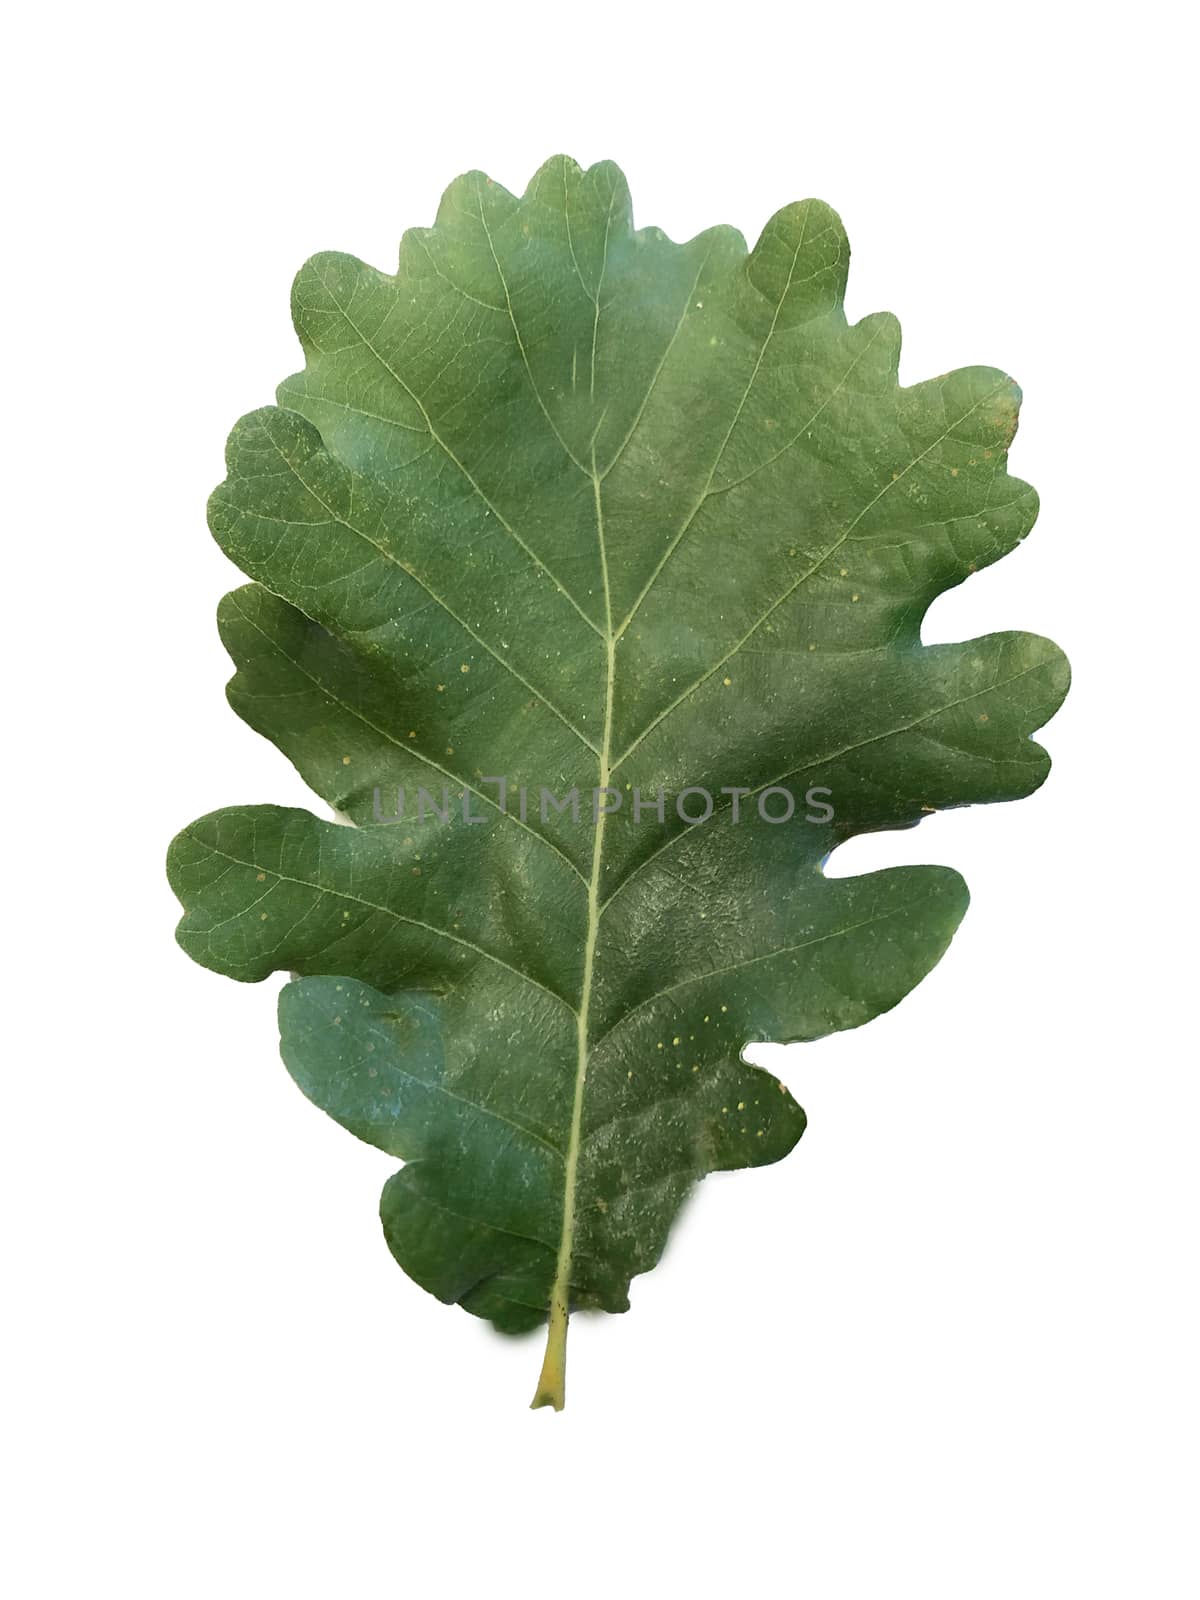 Green oak leaf on a white background.Texture or background by Mastak80